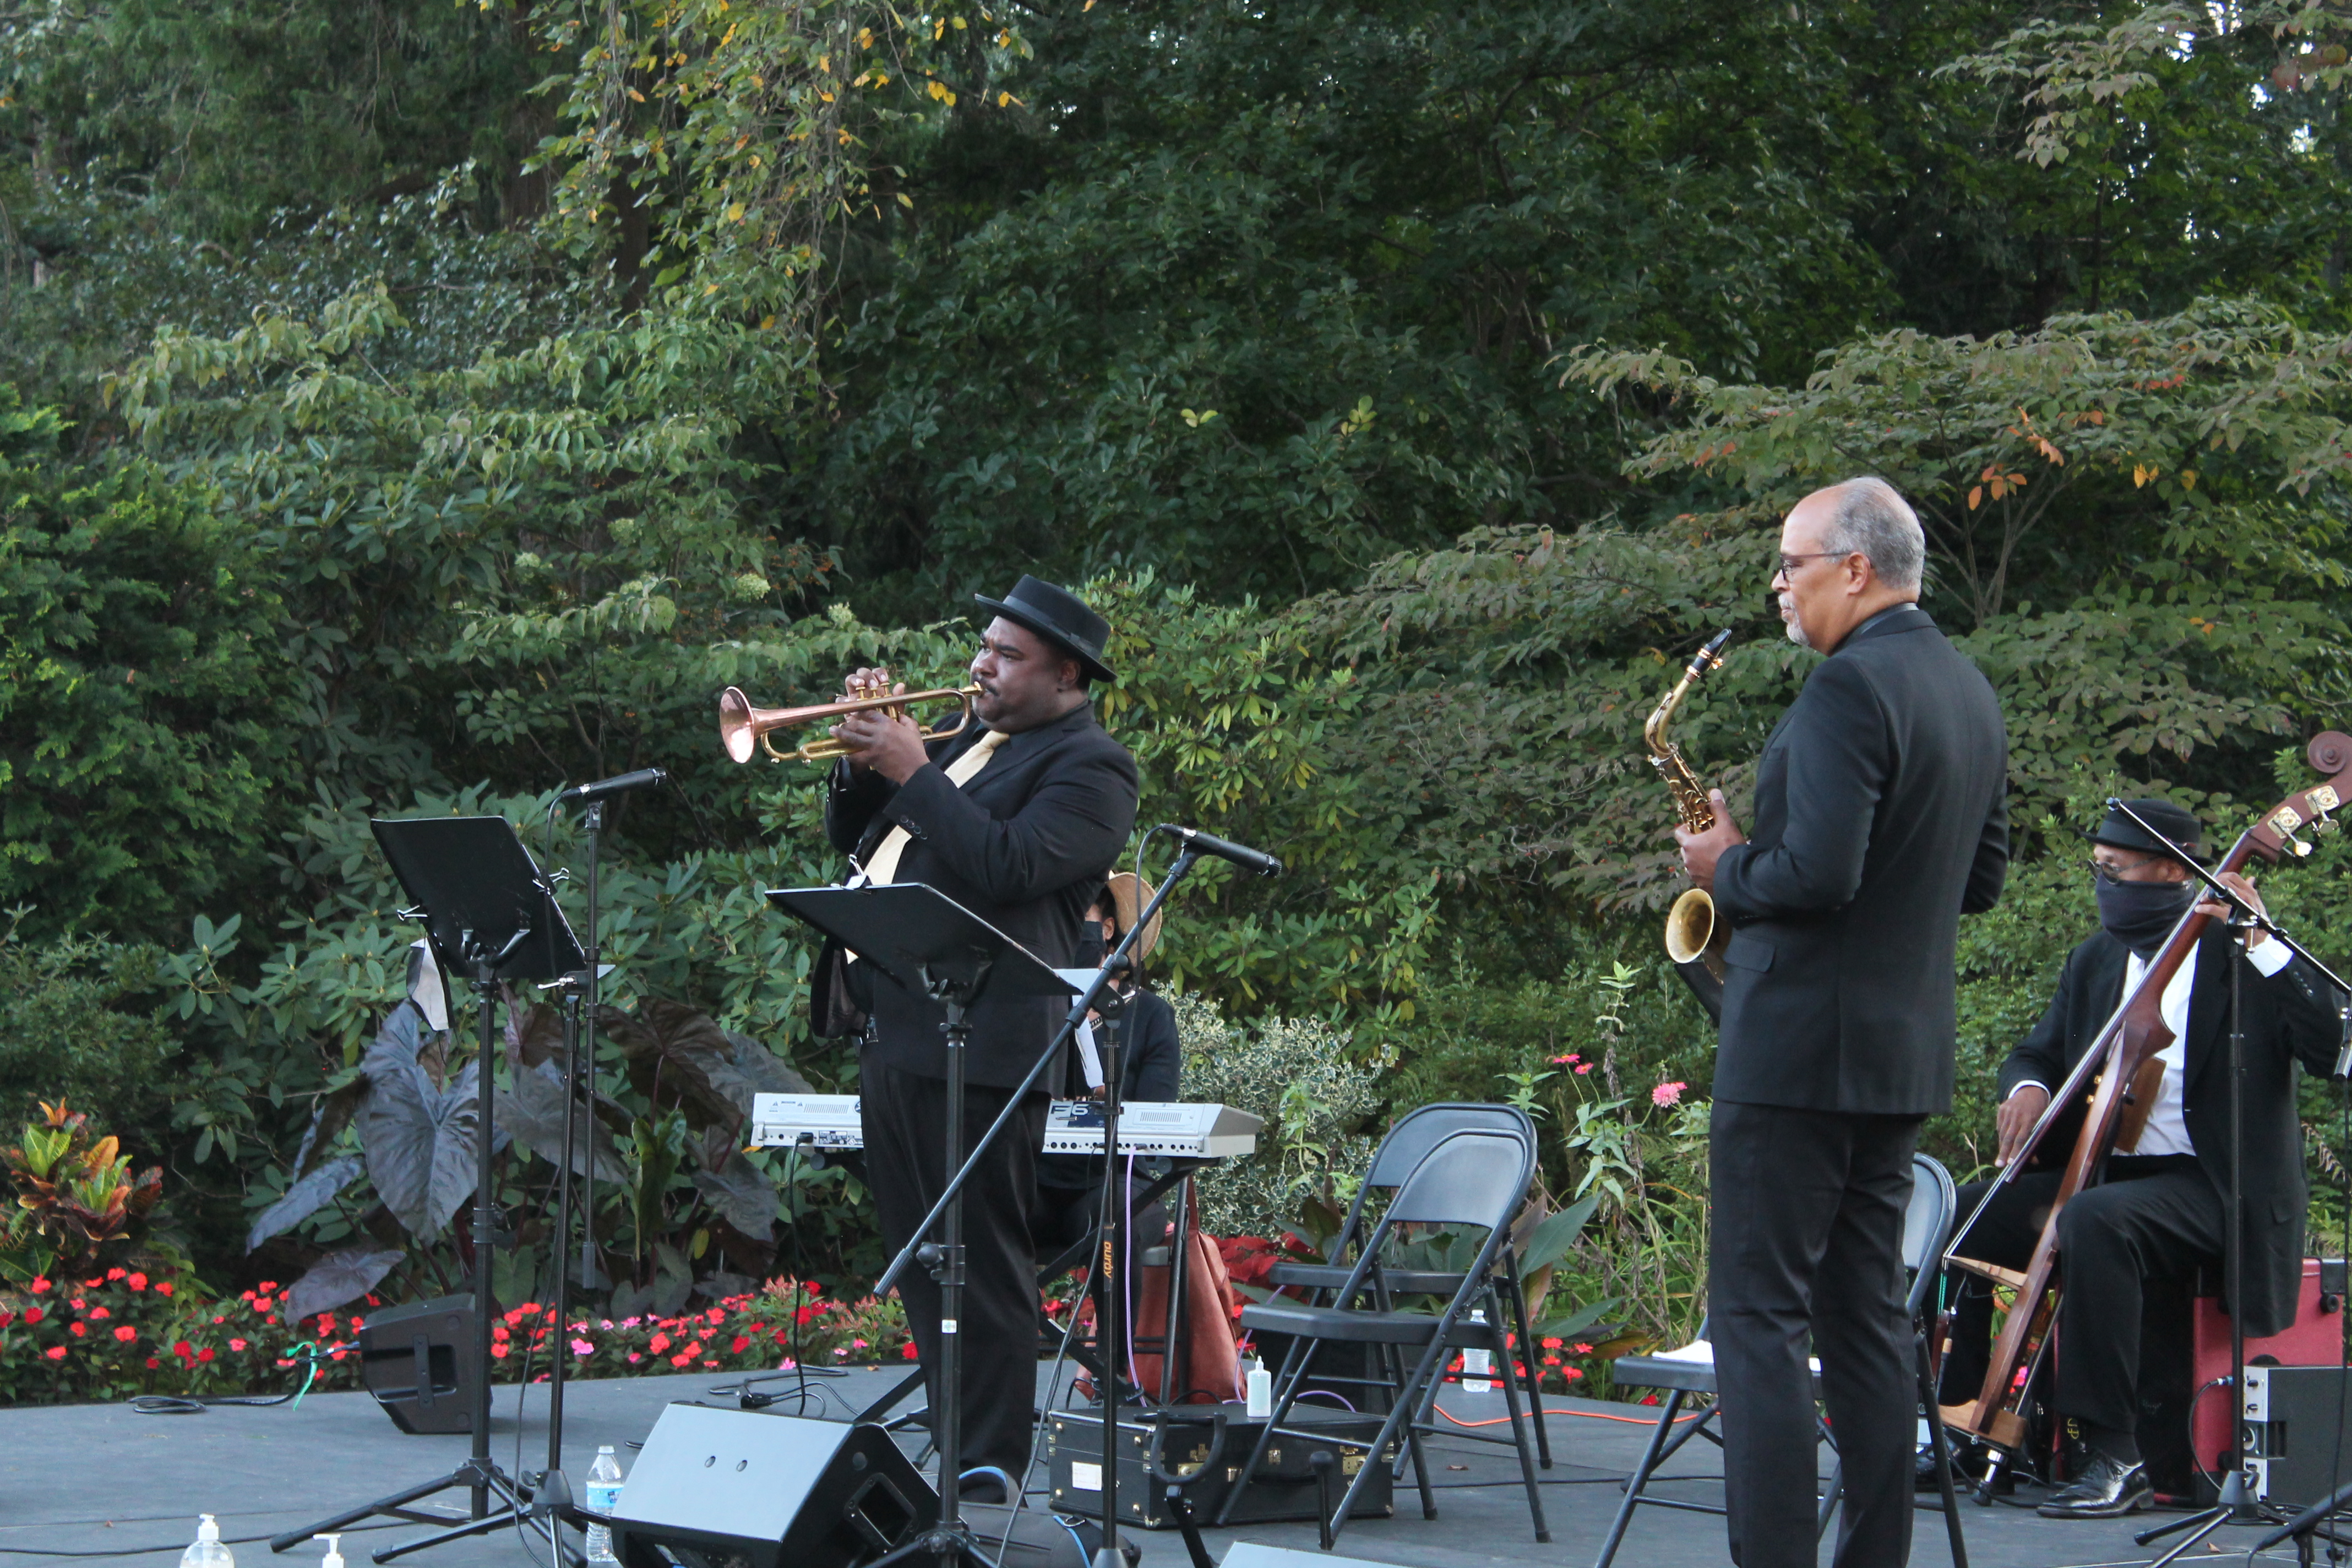 A trumpet player on stage at Jazz in the Gardens at Hillwood.